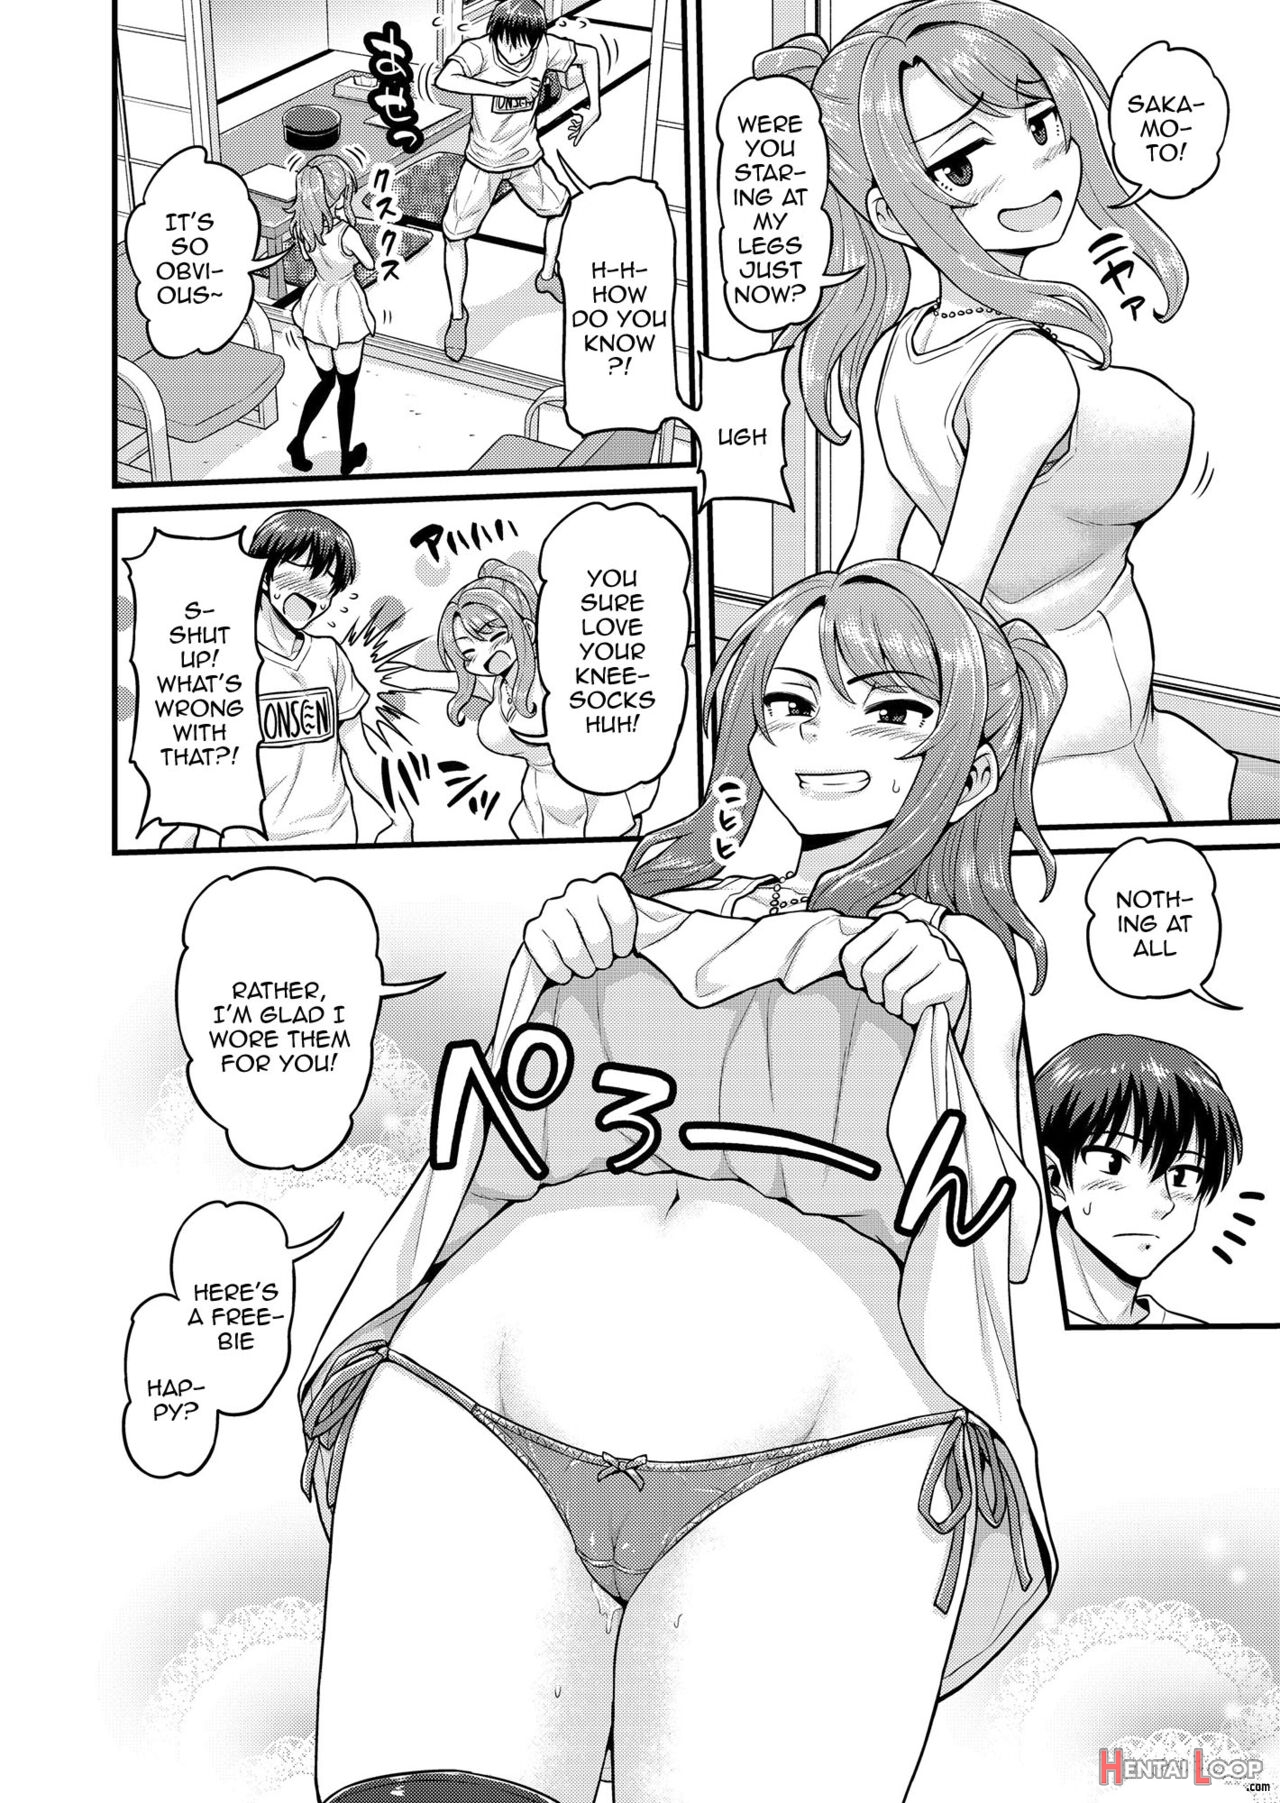 Smashing With Your Gamer Girl Friend At The Hot Spring - Ntr Version page 3